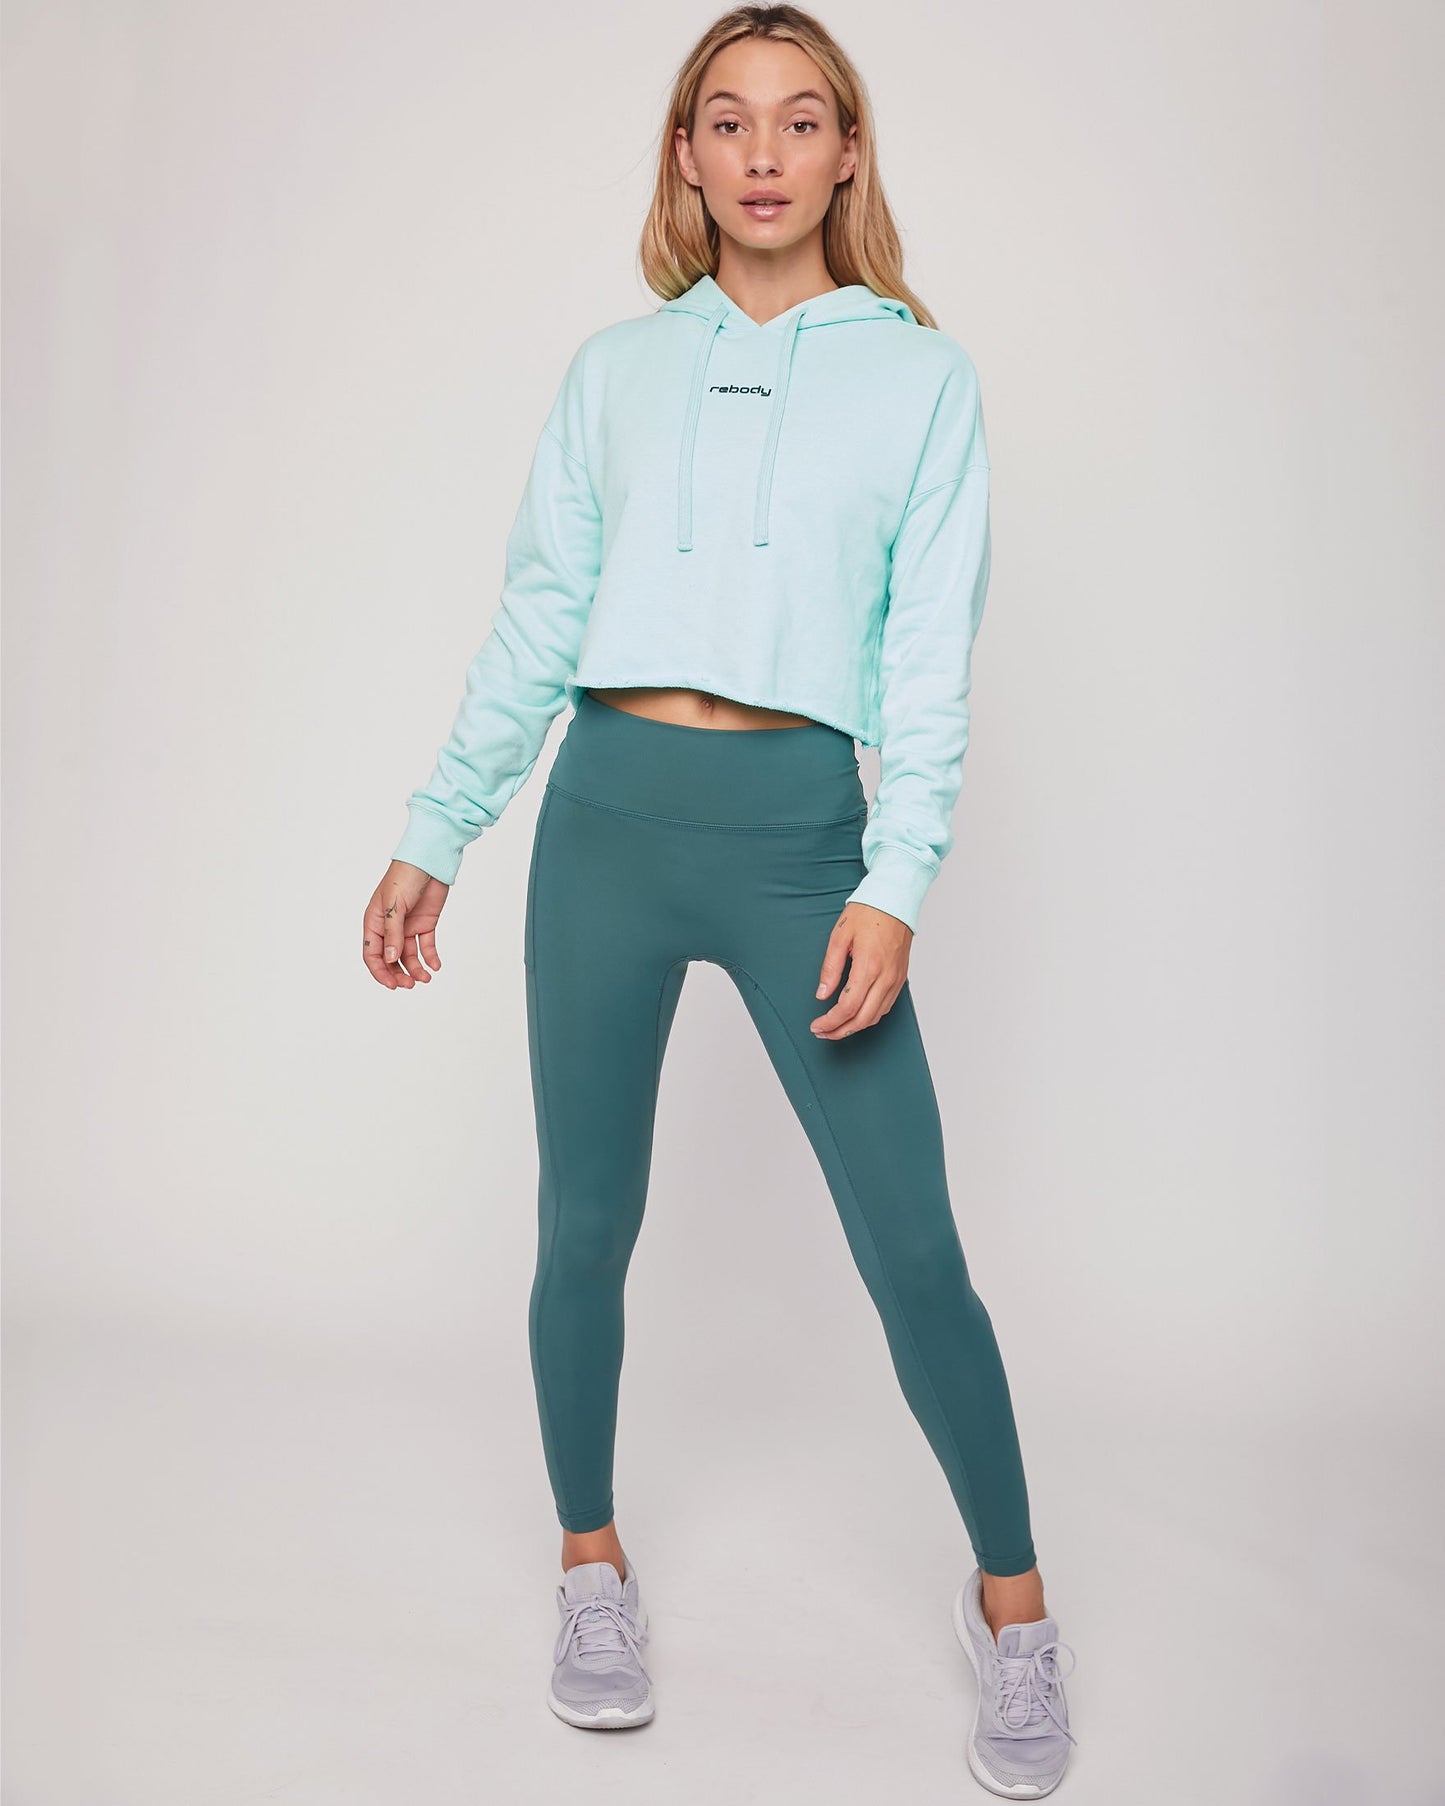 French Terry Crop Hoody - Smooth Mint